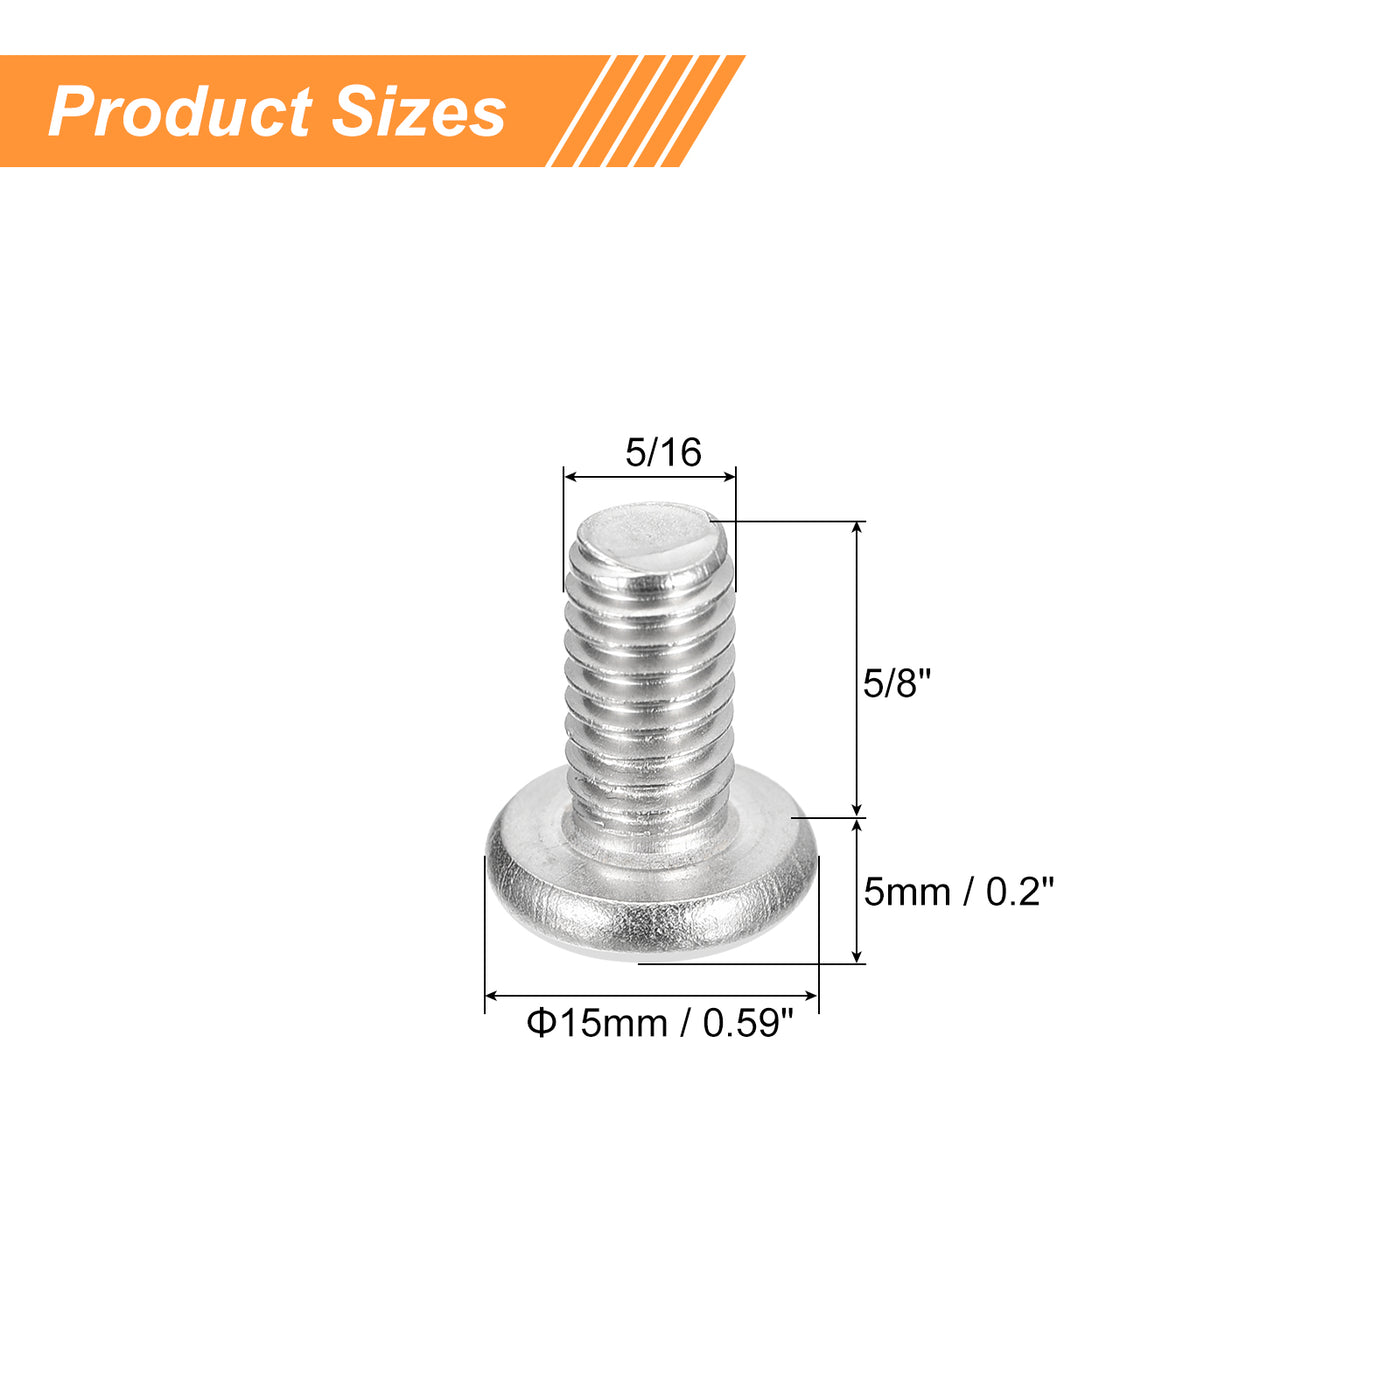 uxcell Uxcell 5/16-18x5/8" Pan Head Machine Screws, Stainless Steel 18-8 Screw, Pack of 10